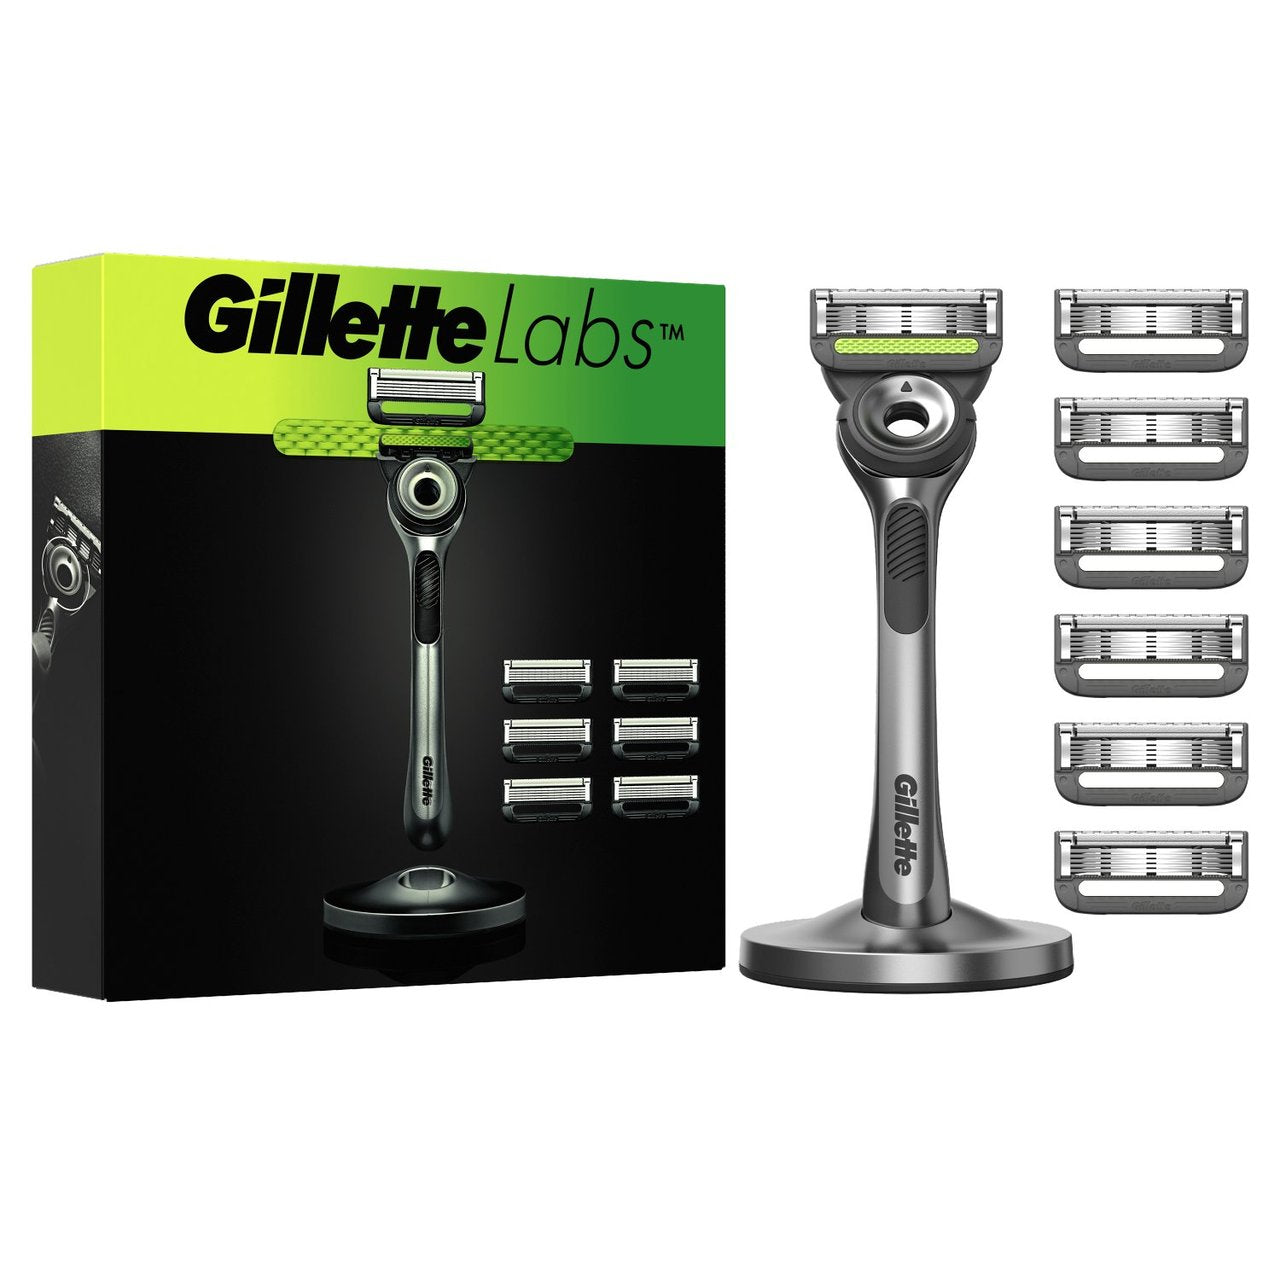 Gillette Labs Big Blade Pack Razor with 7 x  Replacement Blade Refills with Exfoliating Bar